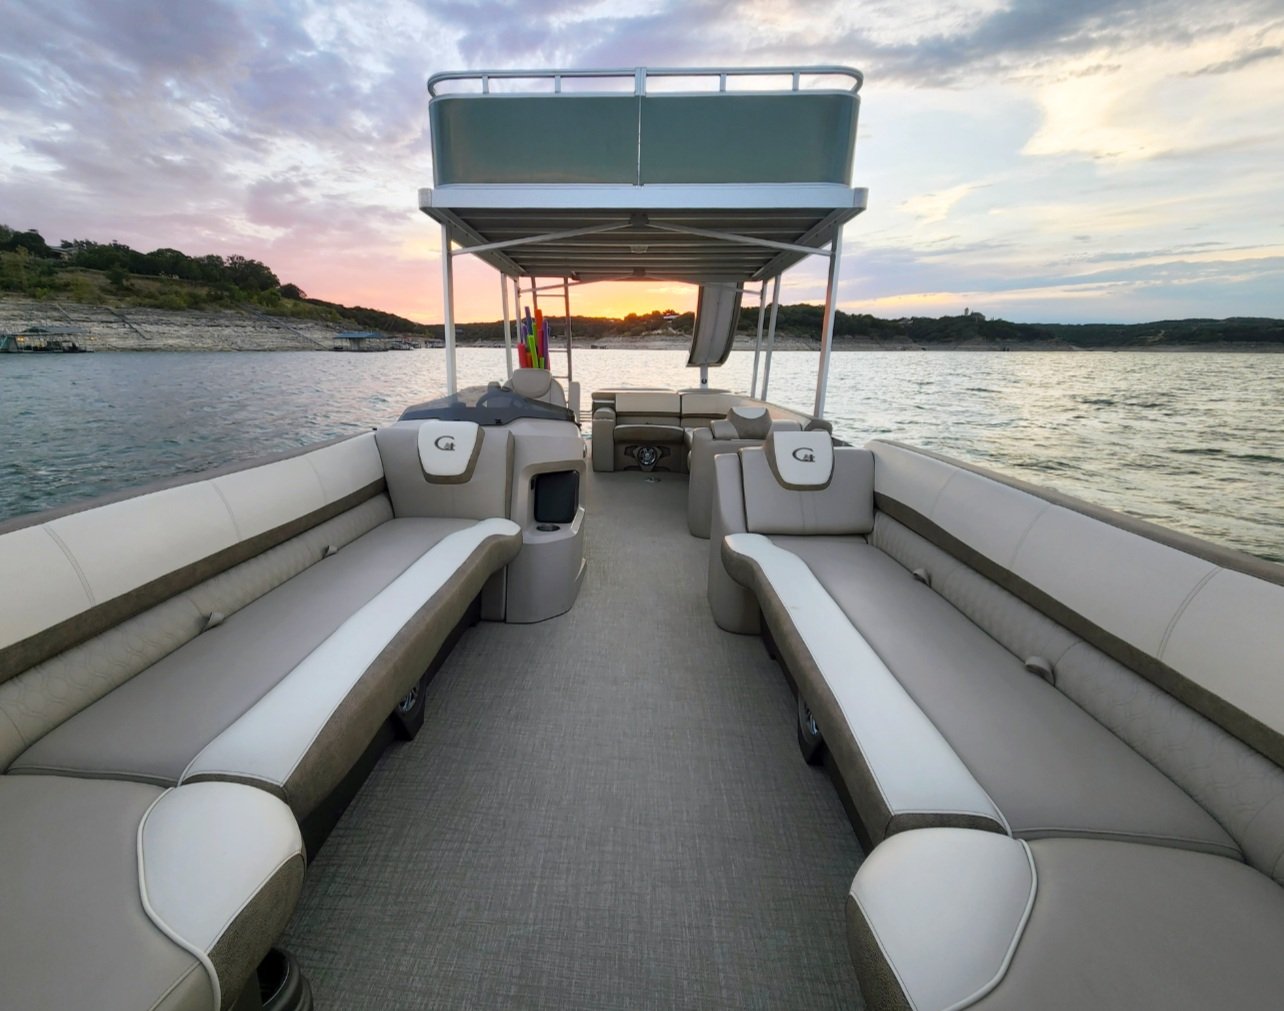 Boats & Coves  Austin Boat Rentals On Lake Travis